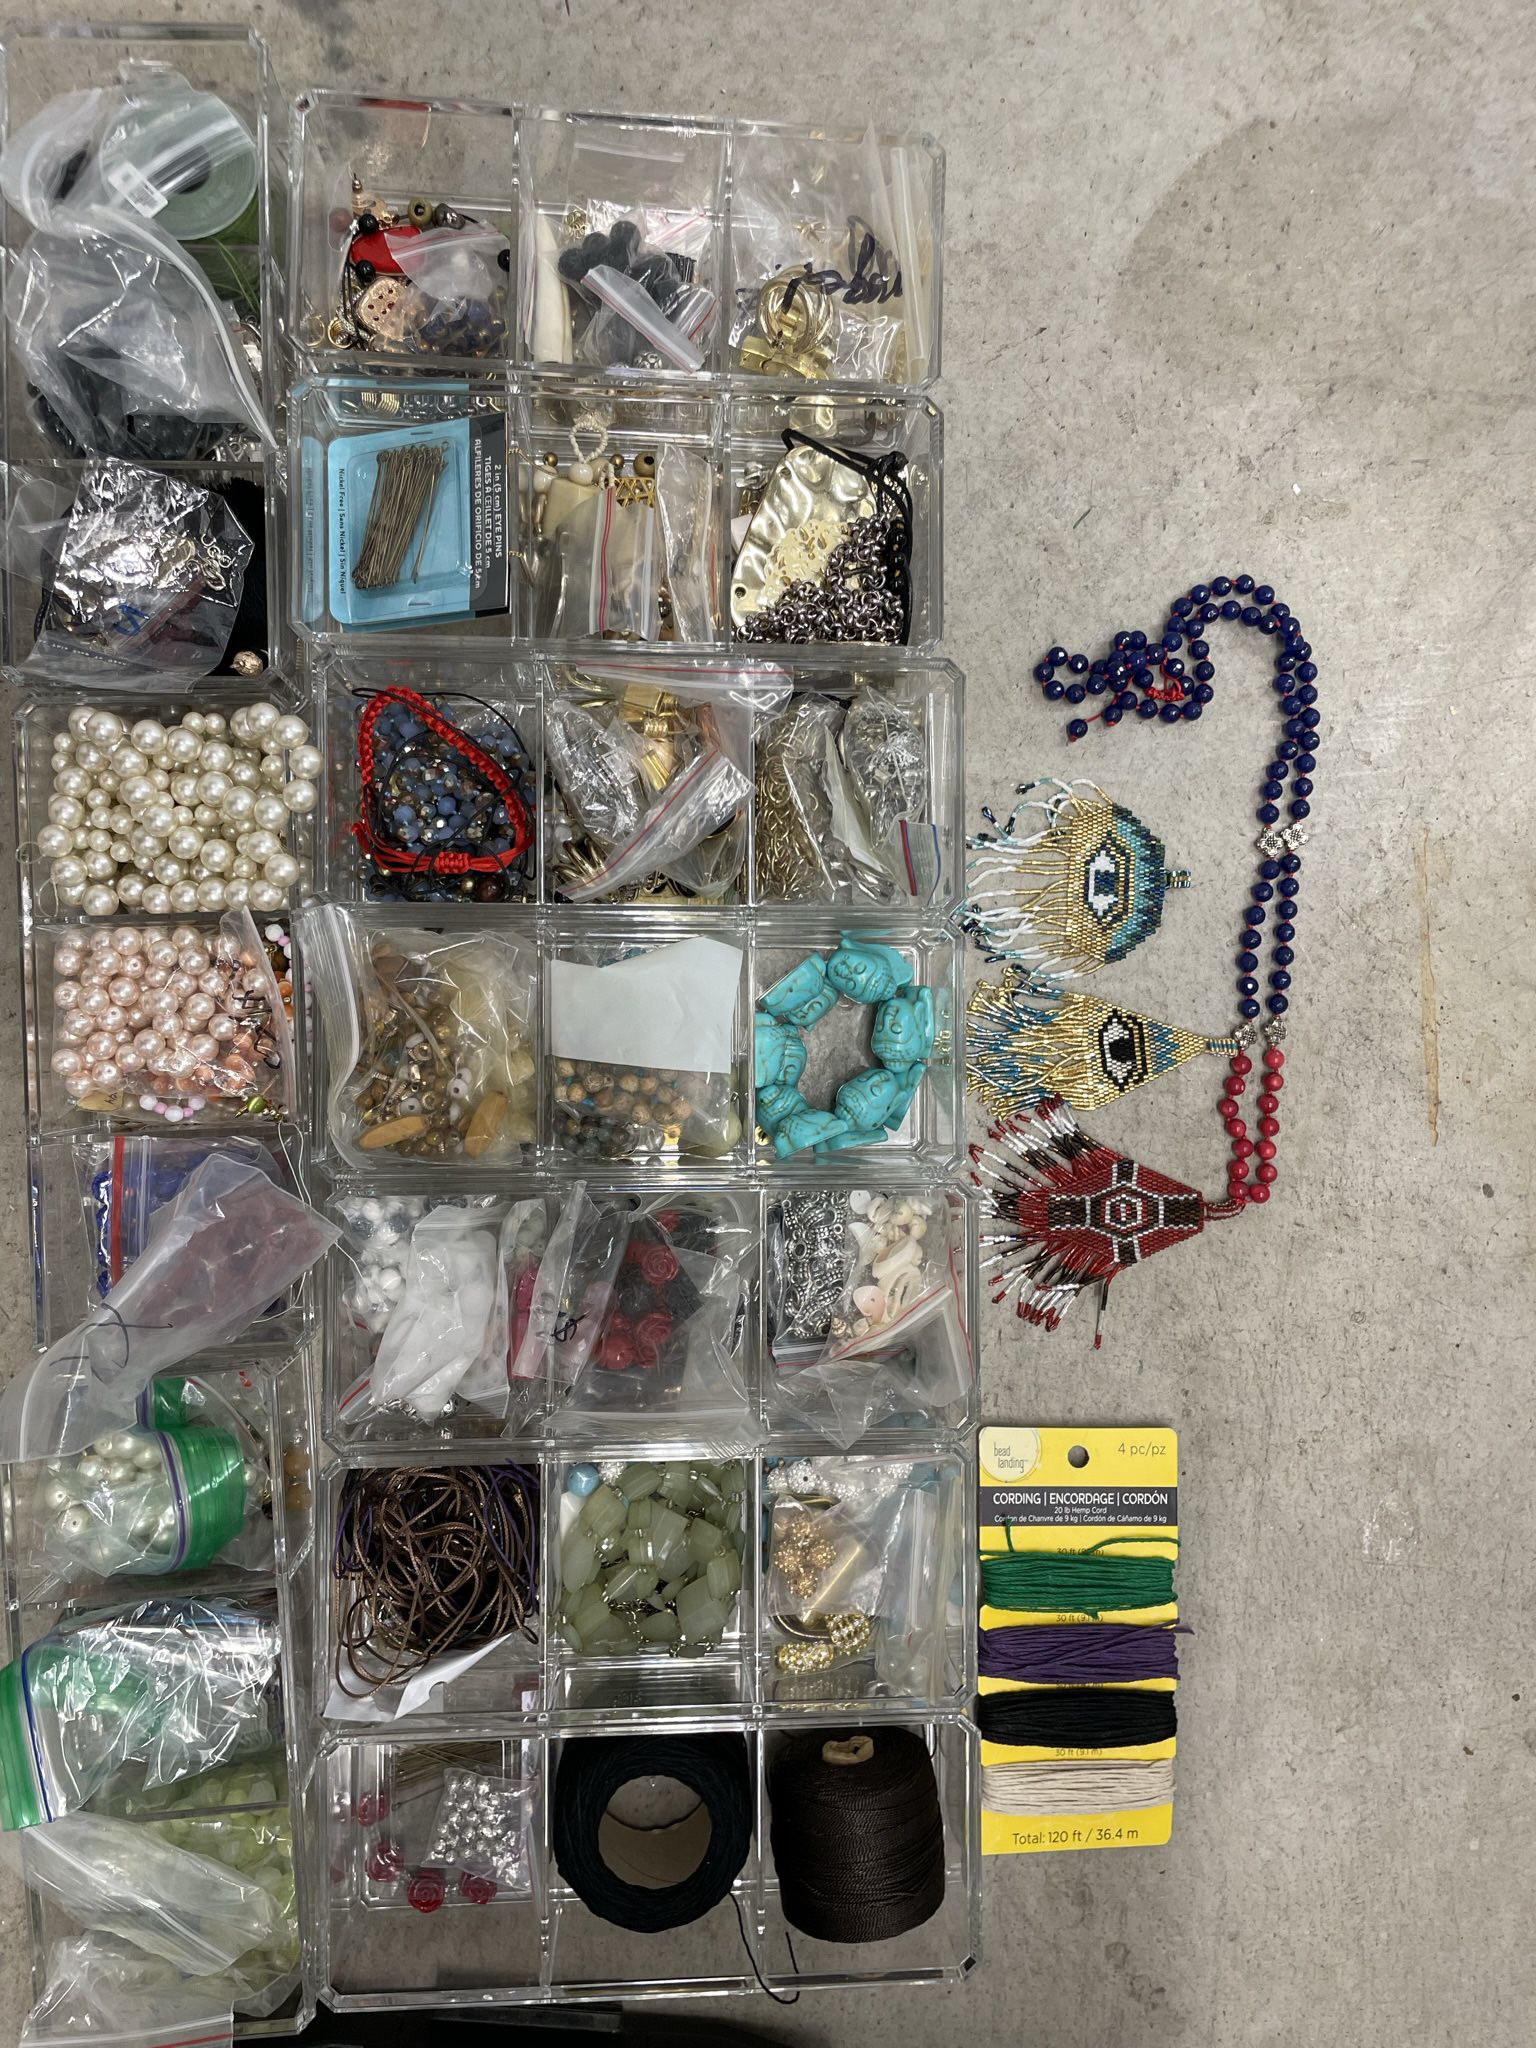 Big Lot Of Jewerly Making Supplies Beads Metal Mixed Charms